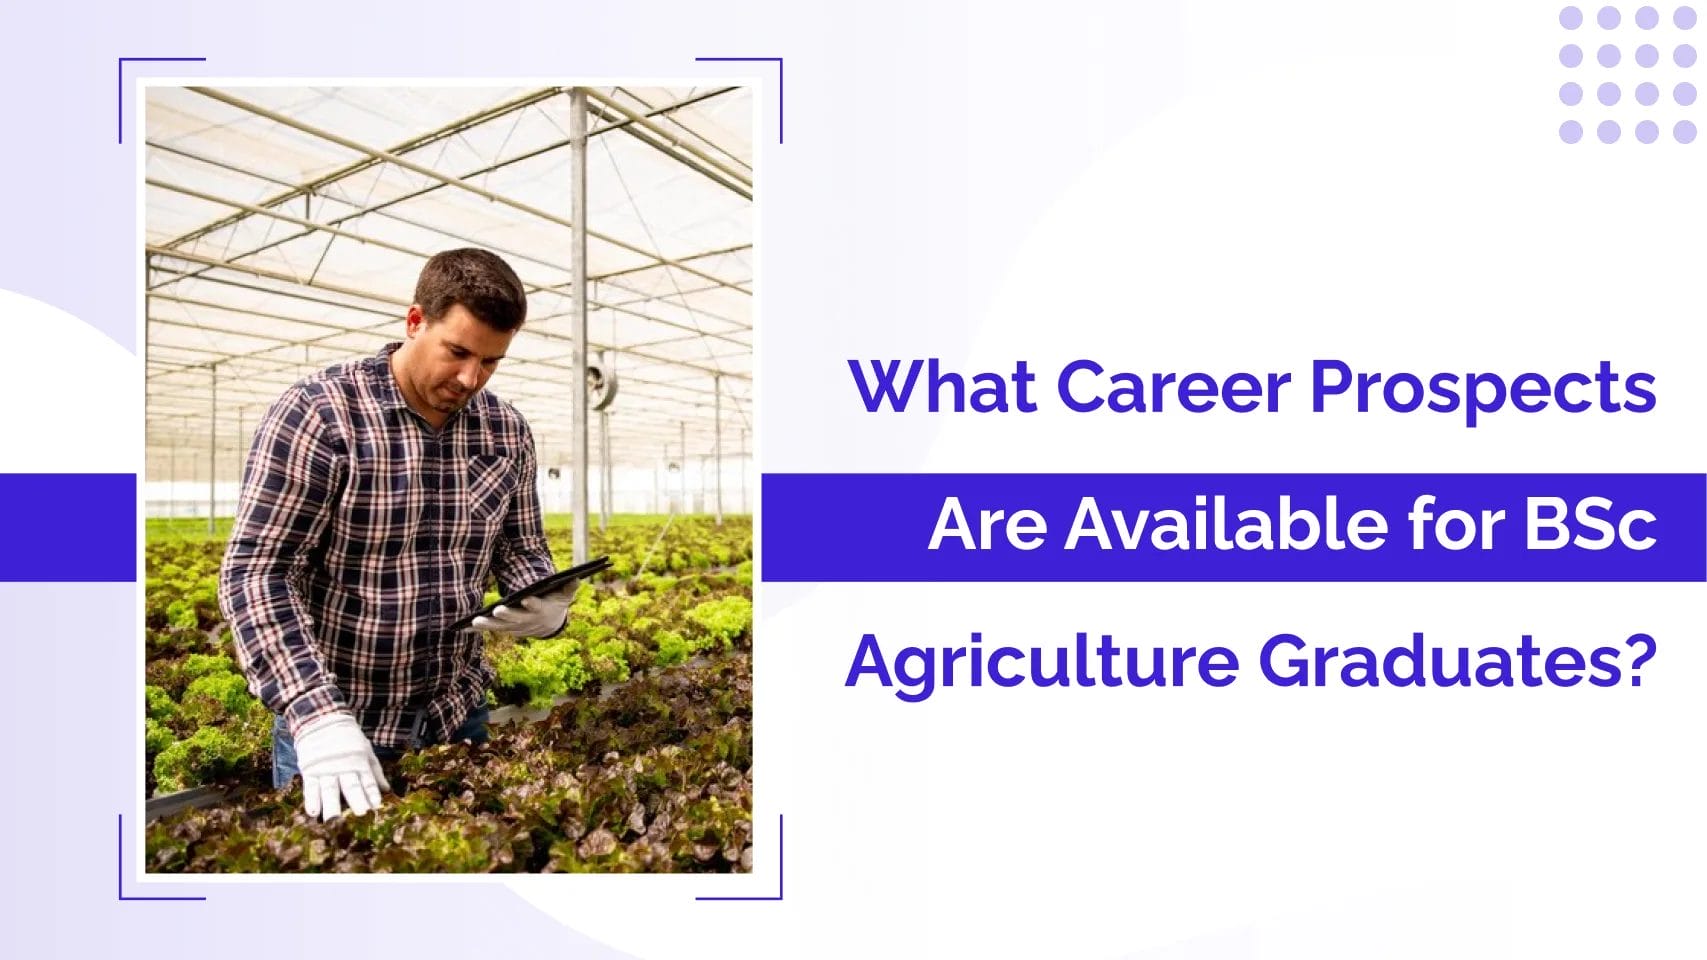 What Career Prospects Are Available for BSc Agriculture Graduates?